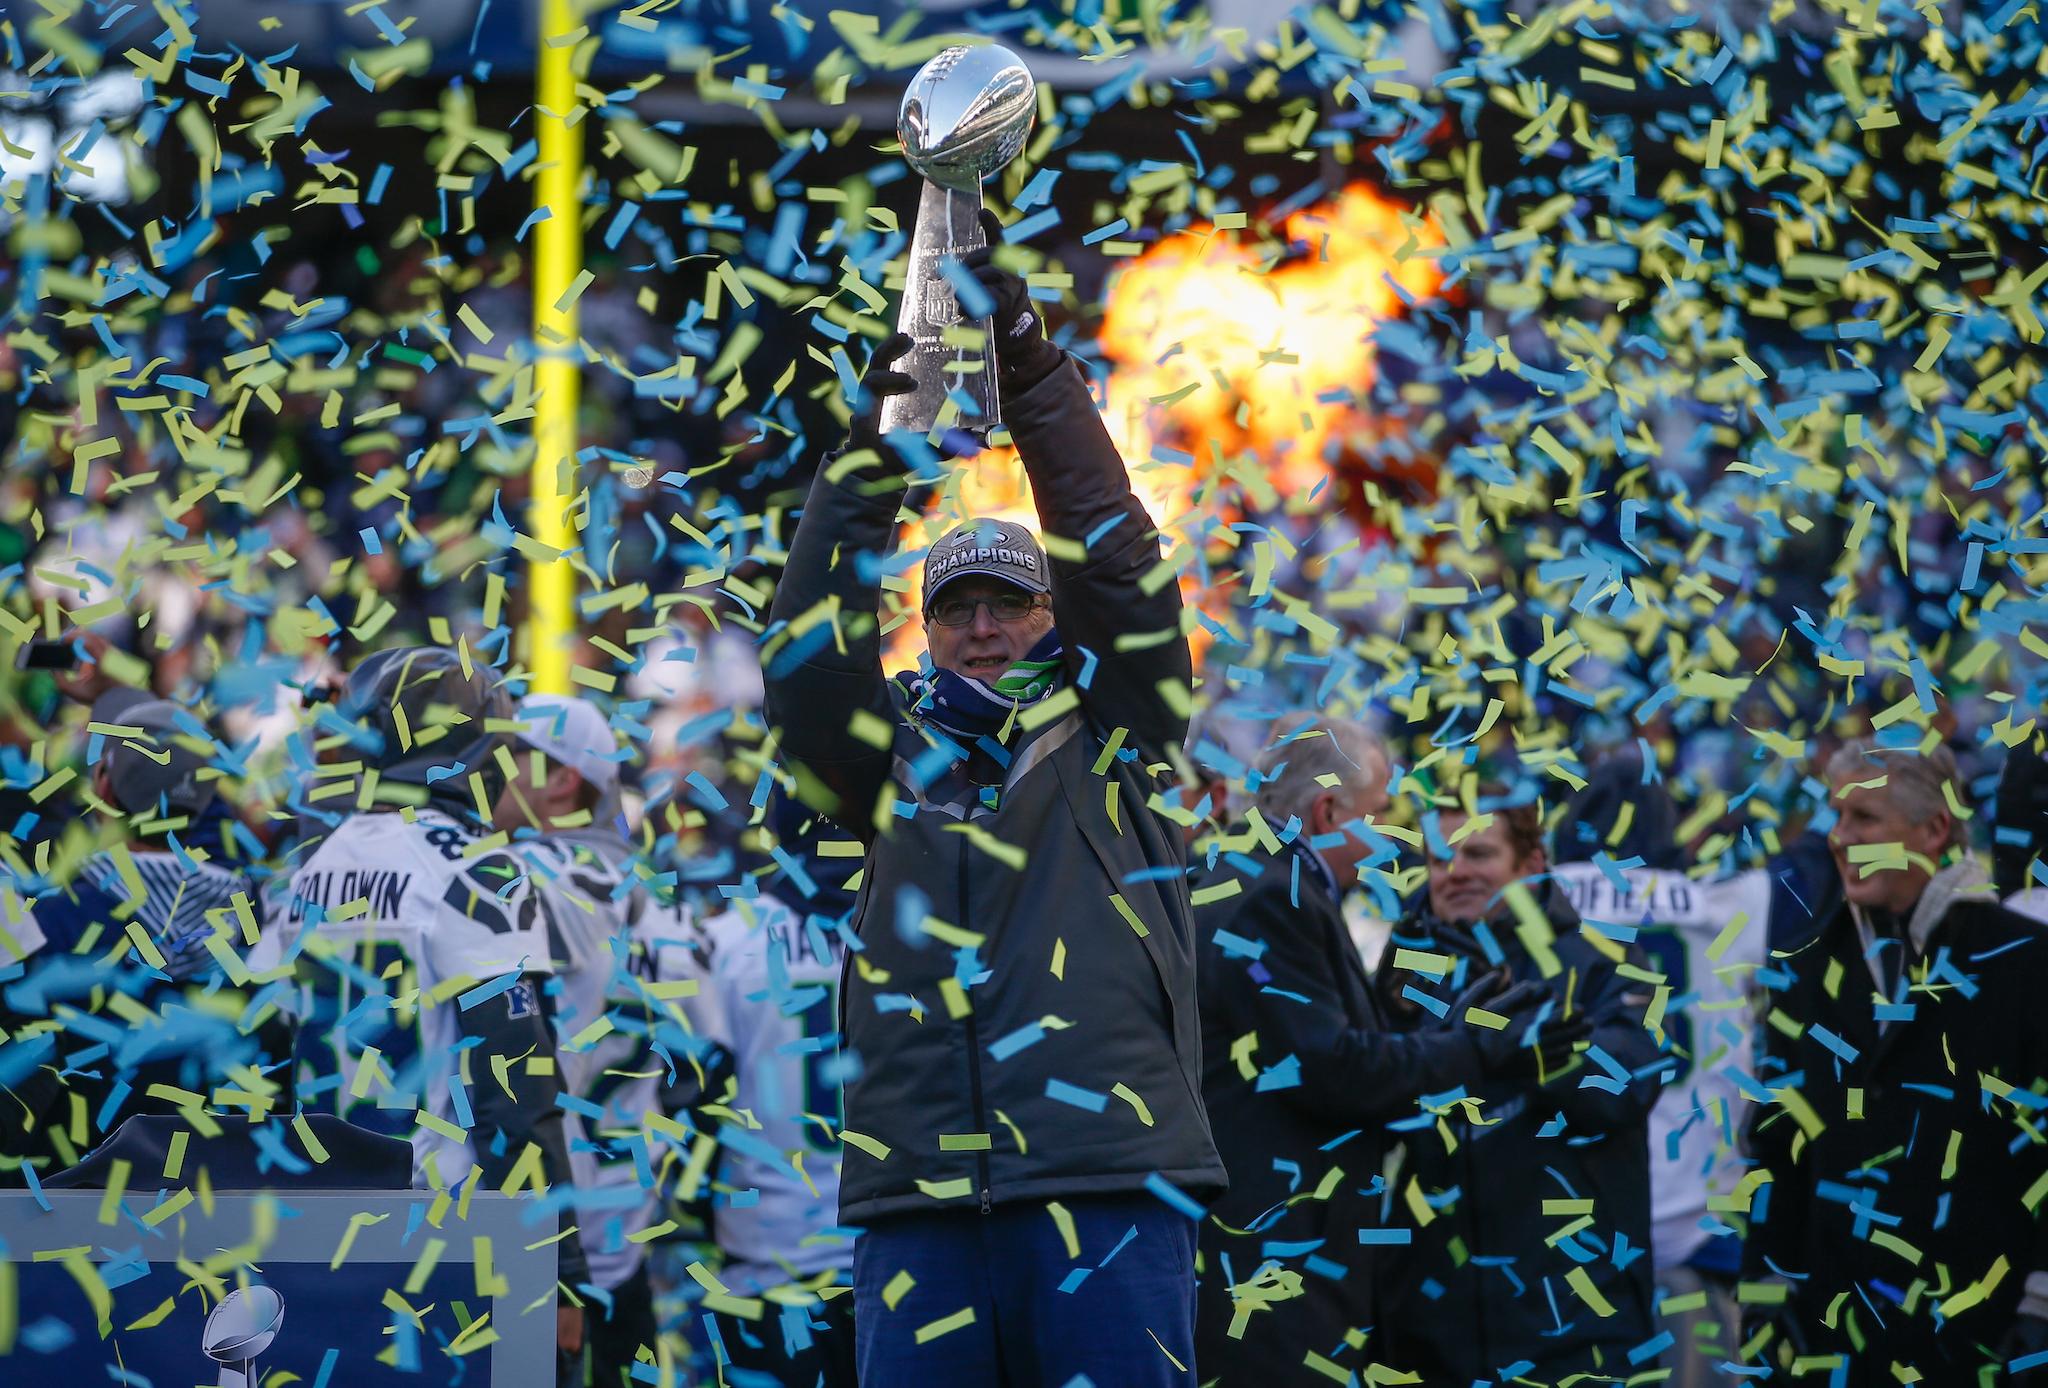 Team Owner Paul Allen of the Seattle Seahawks holds the Lombardi Trophy during ceremonies following the Super Bowl XLVIII Victory Parade at CenturyLink Field on February 5, 2014